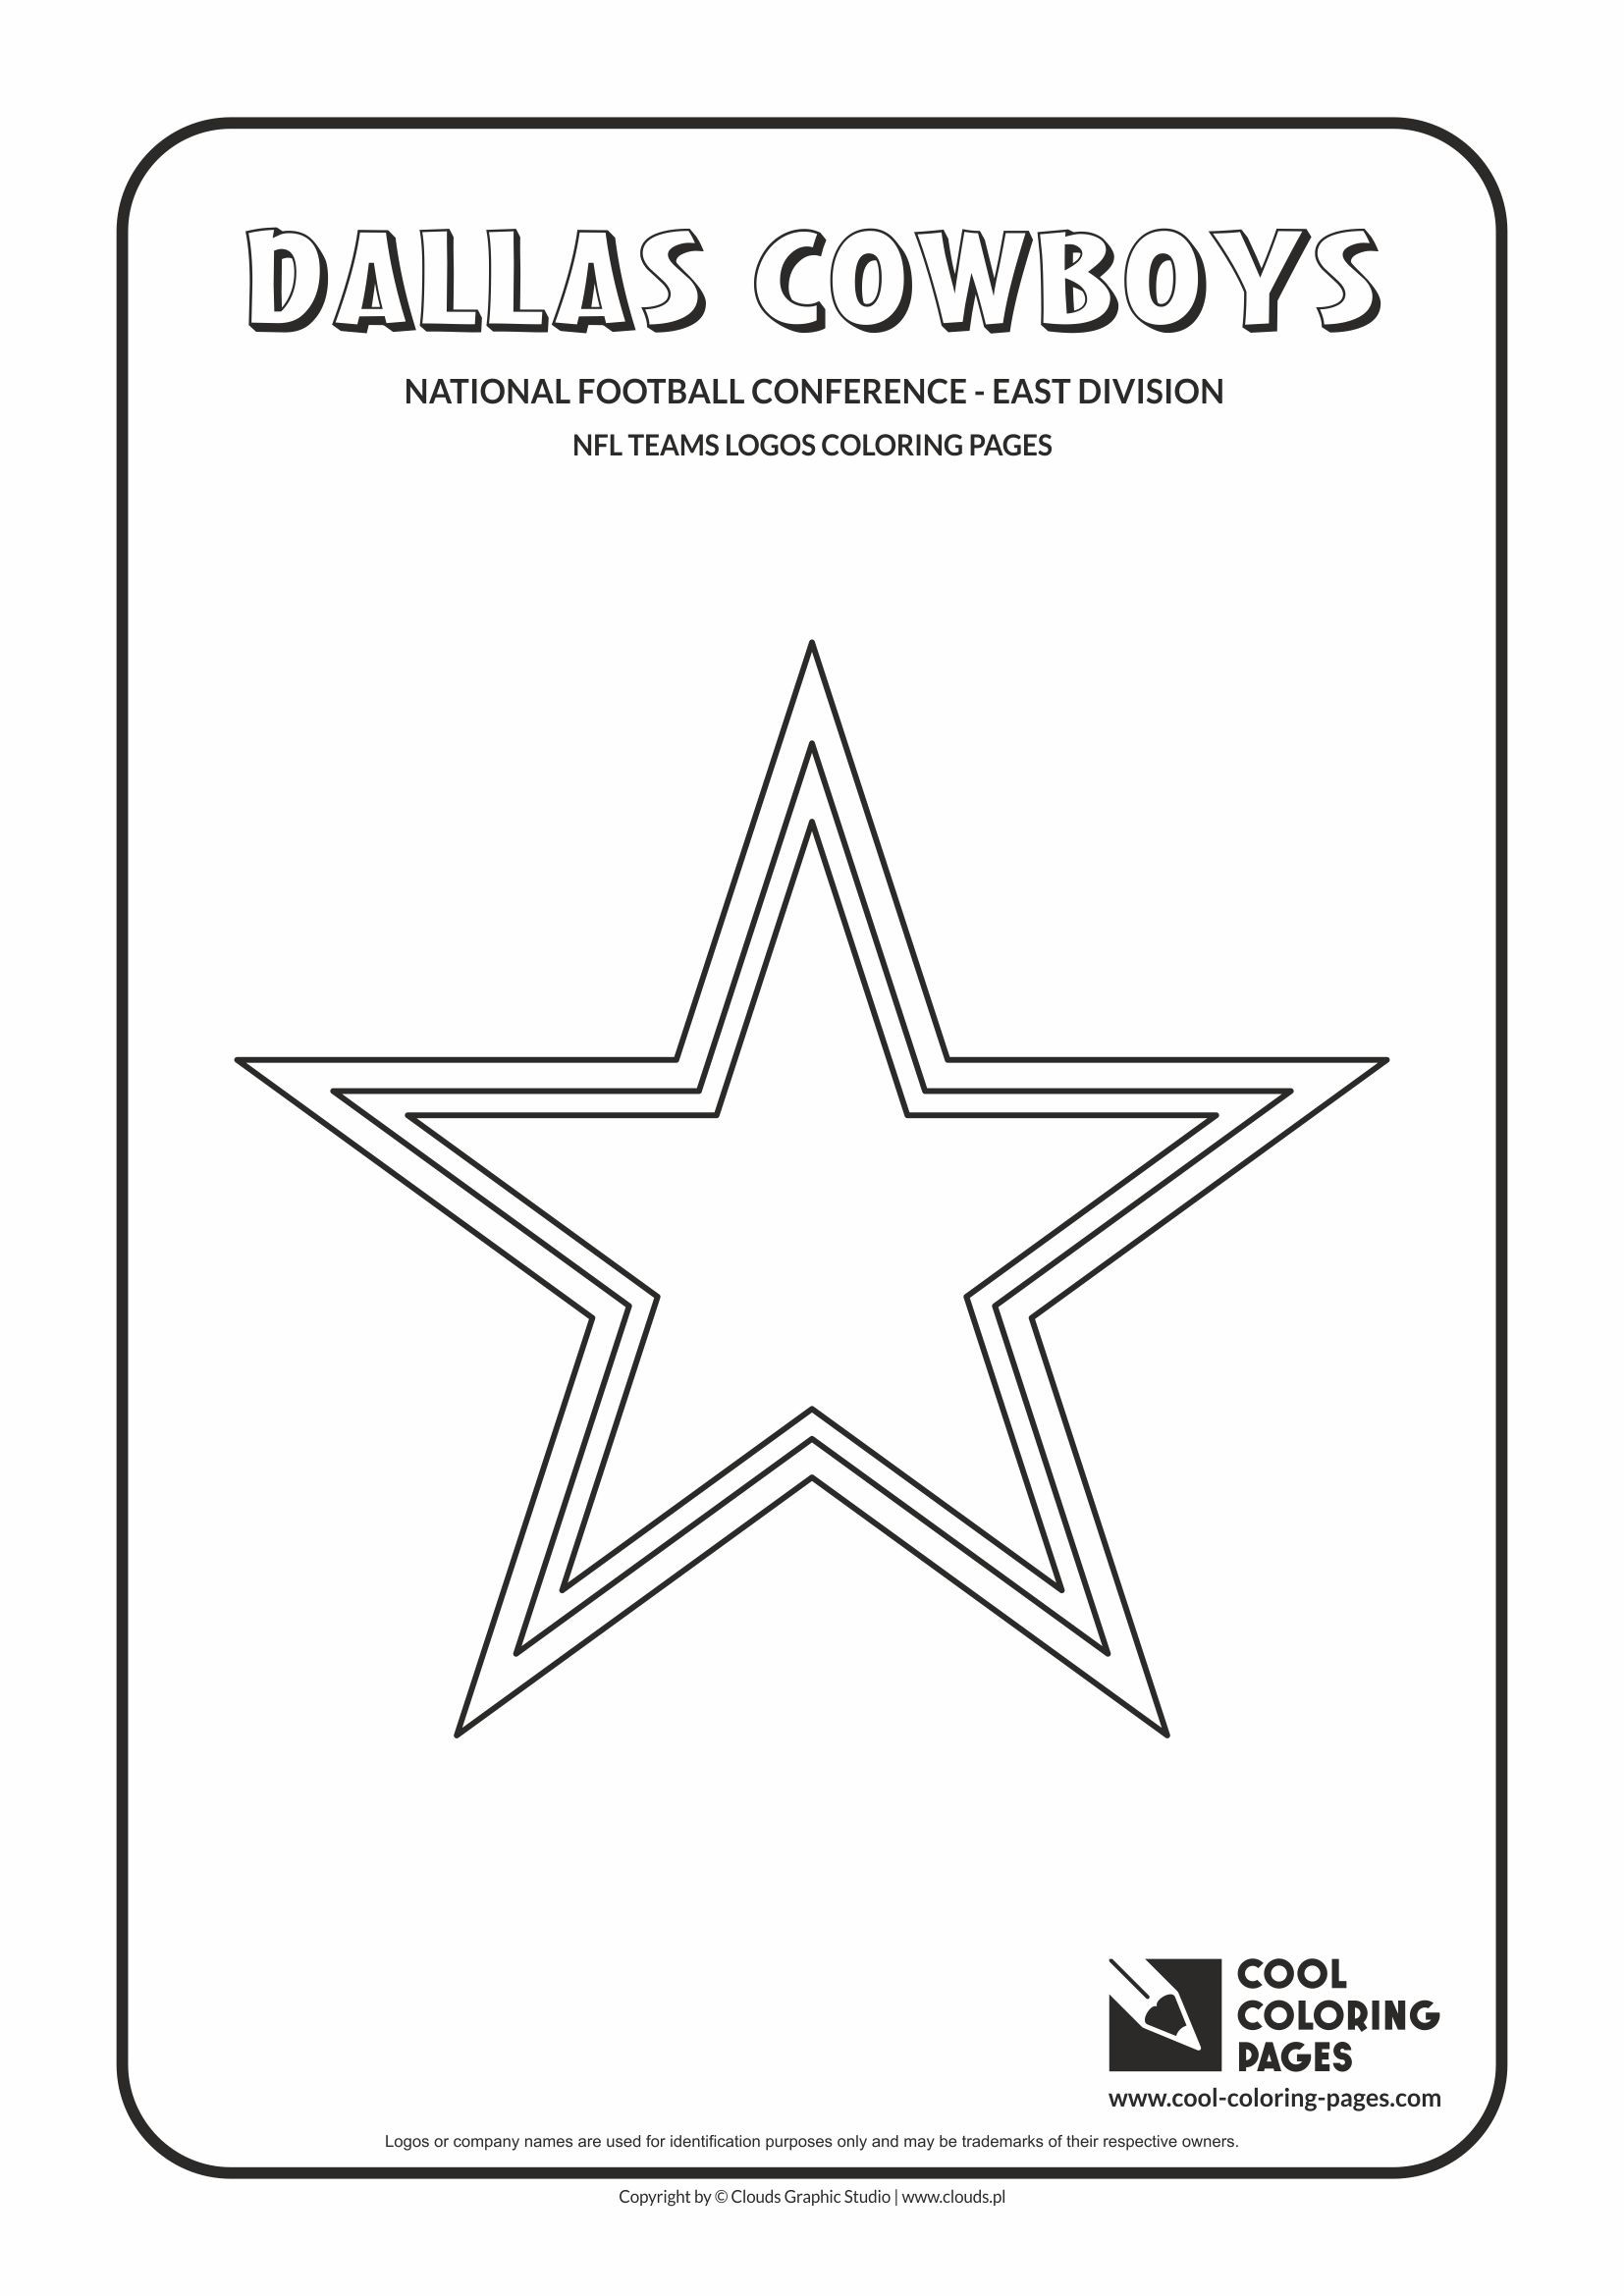 Dallas Cowboys Coloring Sheet
 Cool Coloring Pages NFL teams logos coloring pages Cool